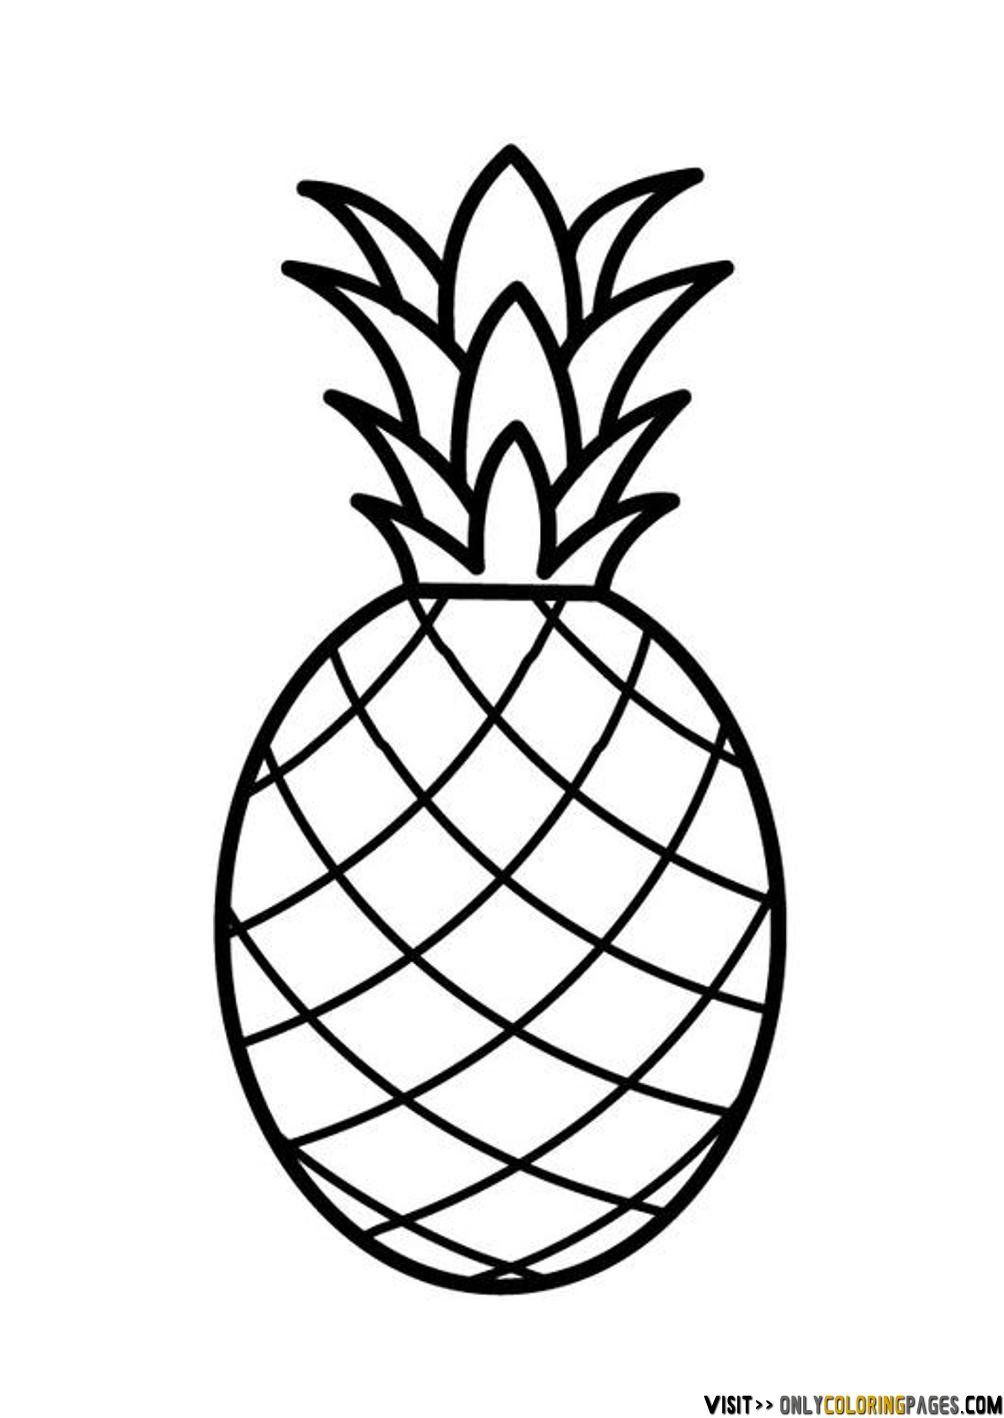 Clipart pineapple kid. Coloring page only pages